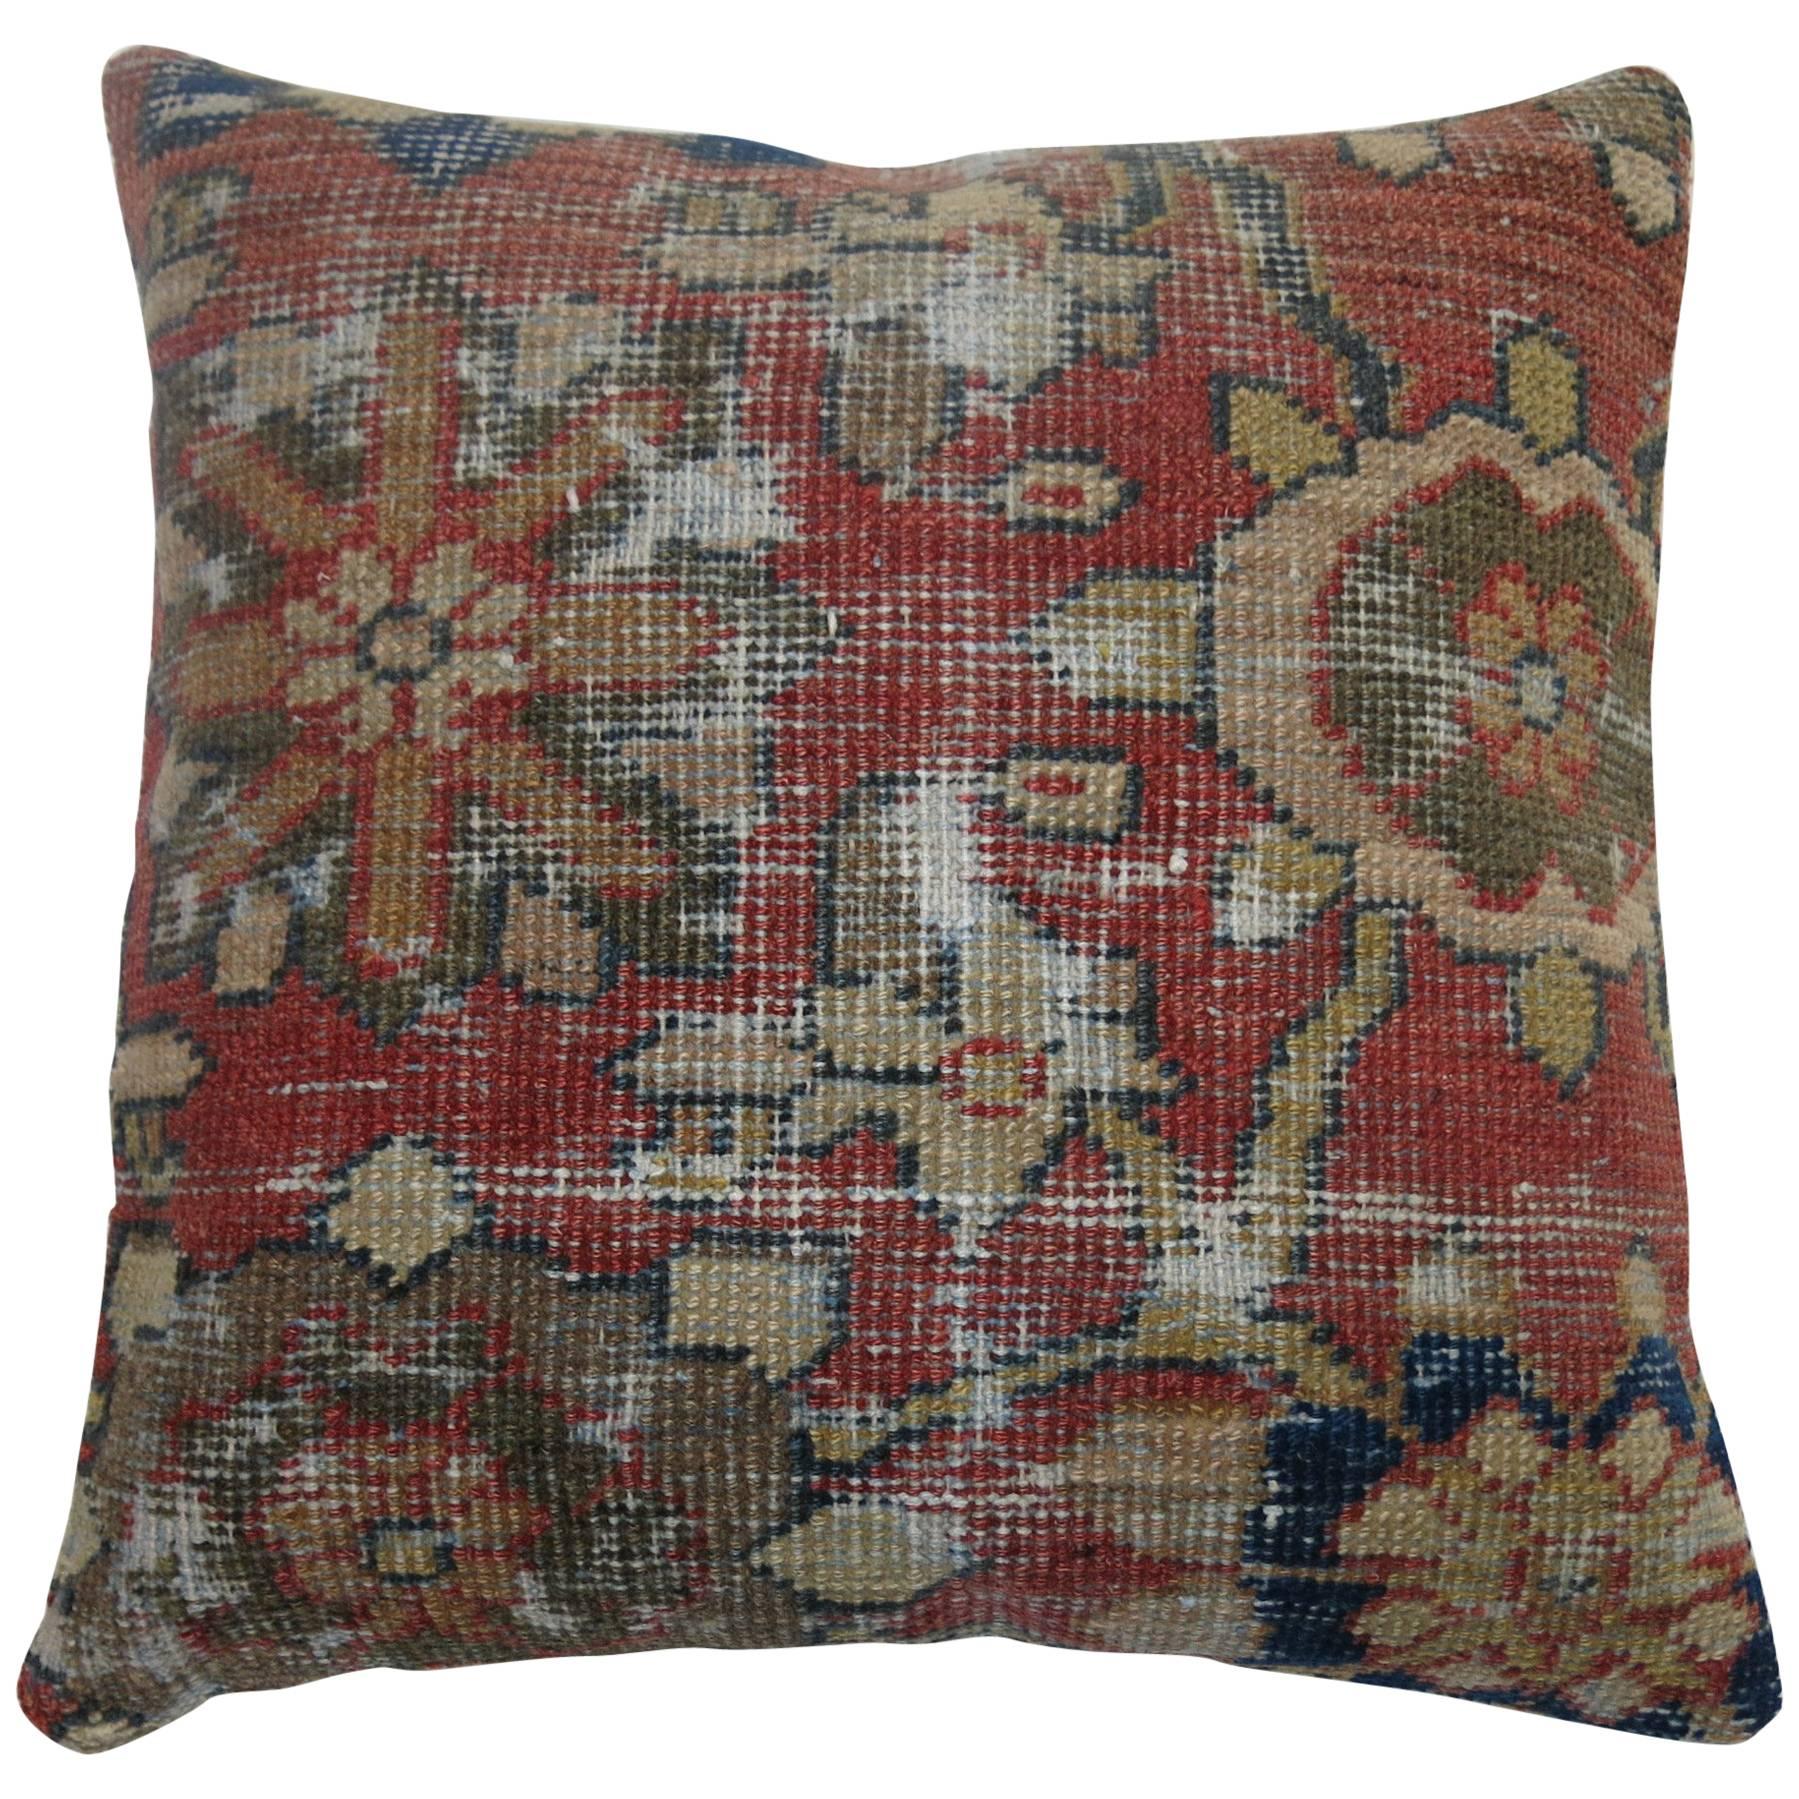 Rustic Shabby Chic Persian Rug Pillow